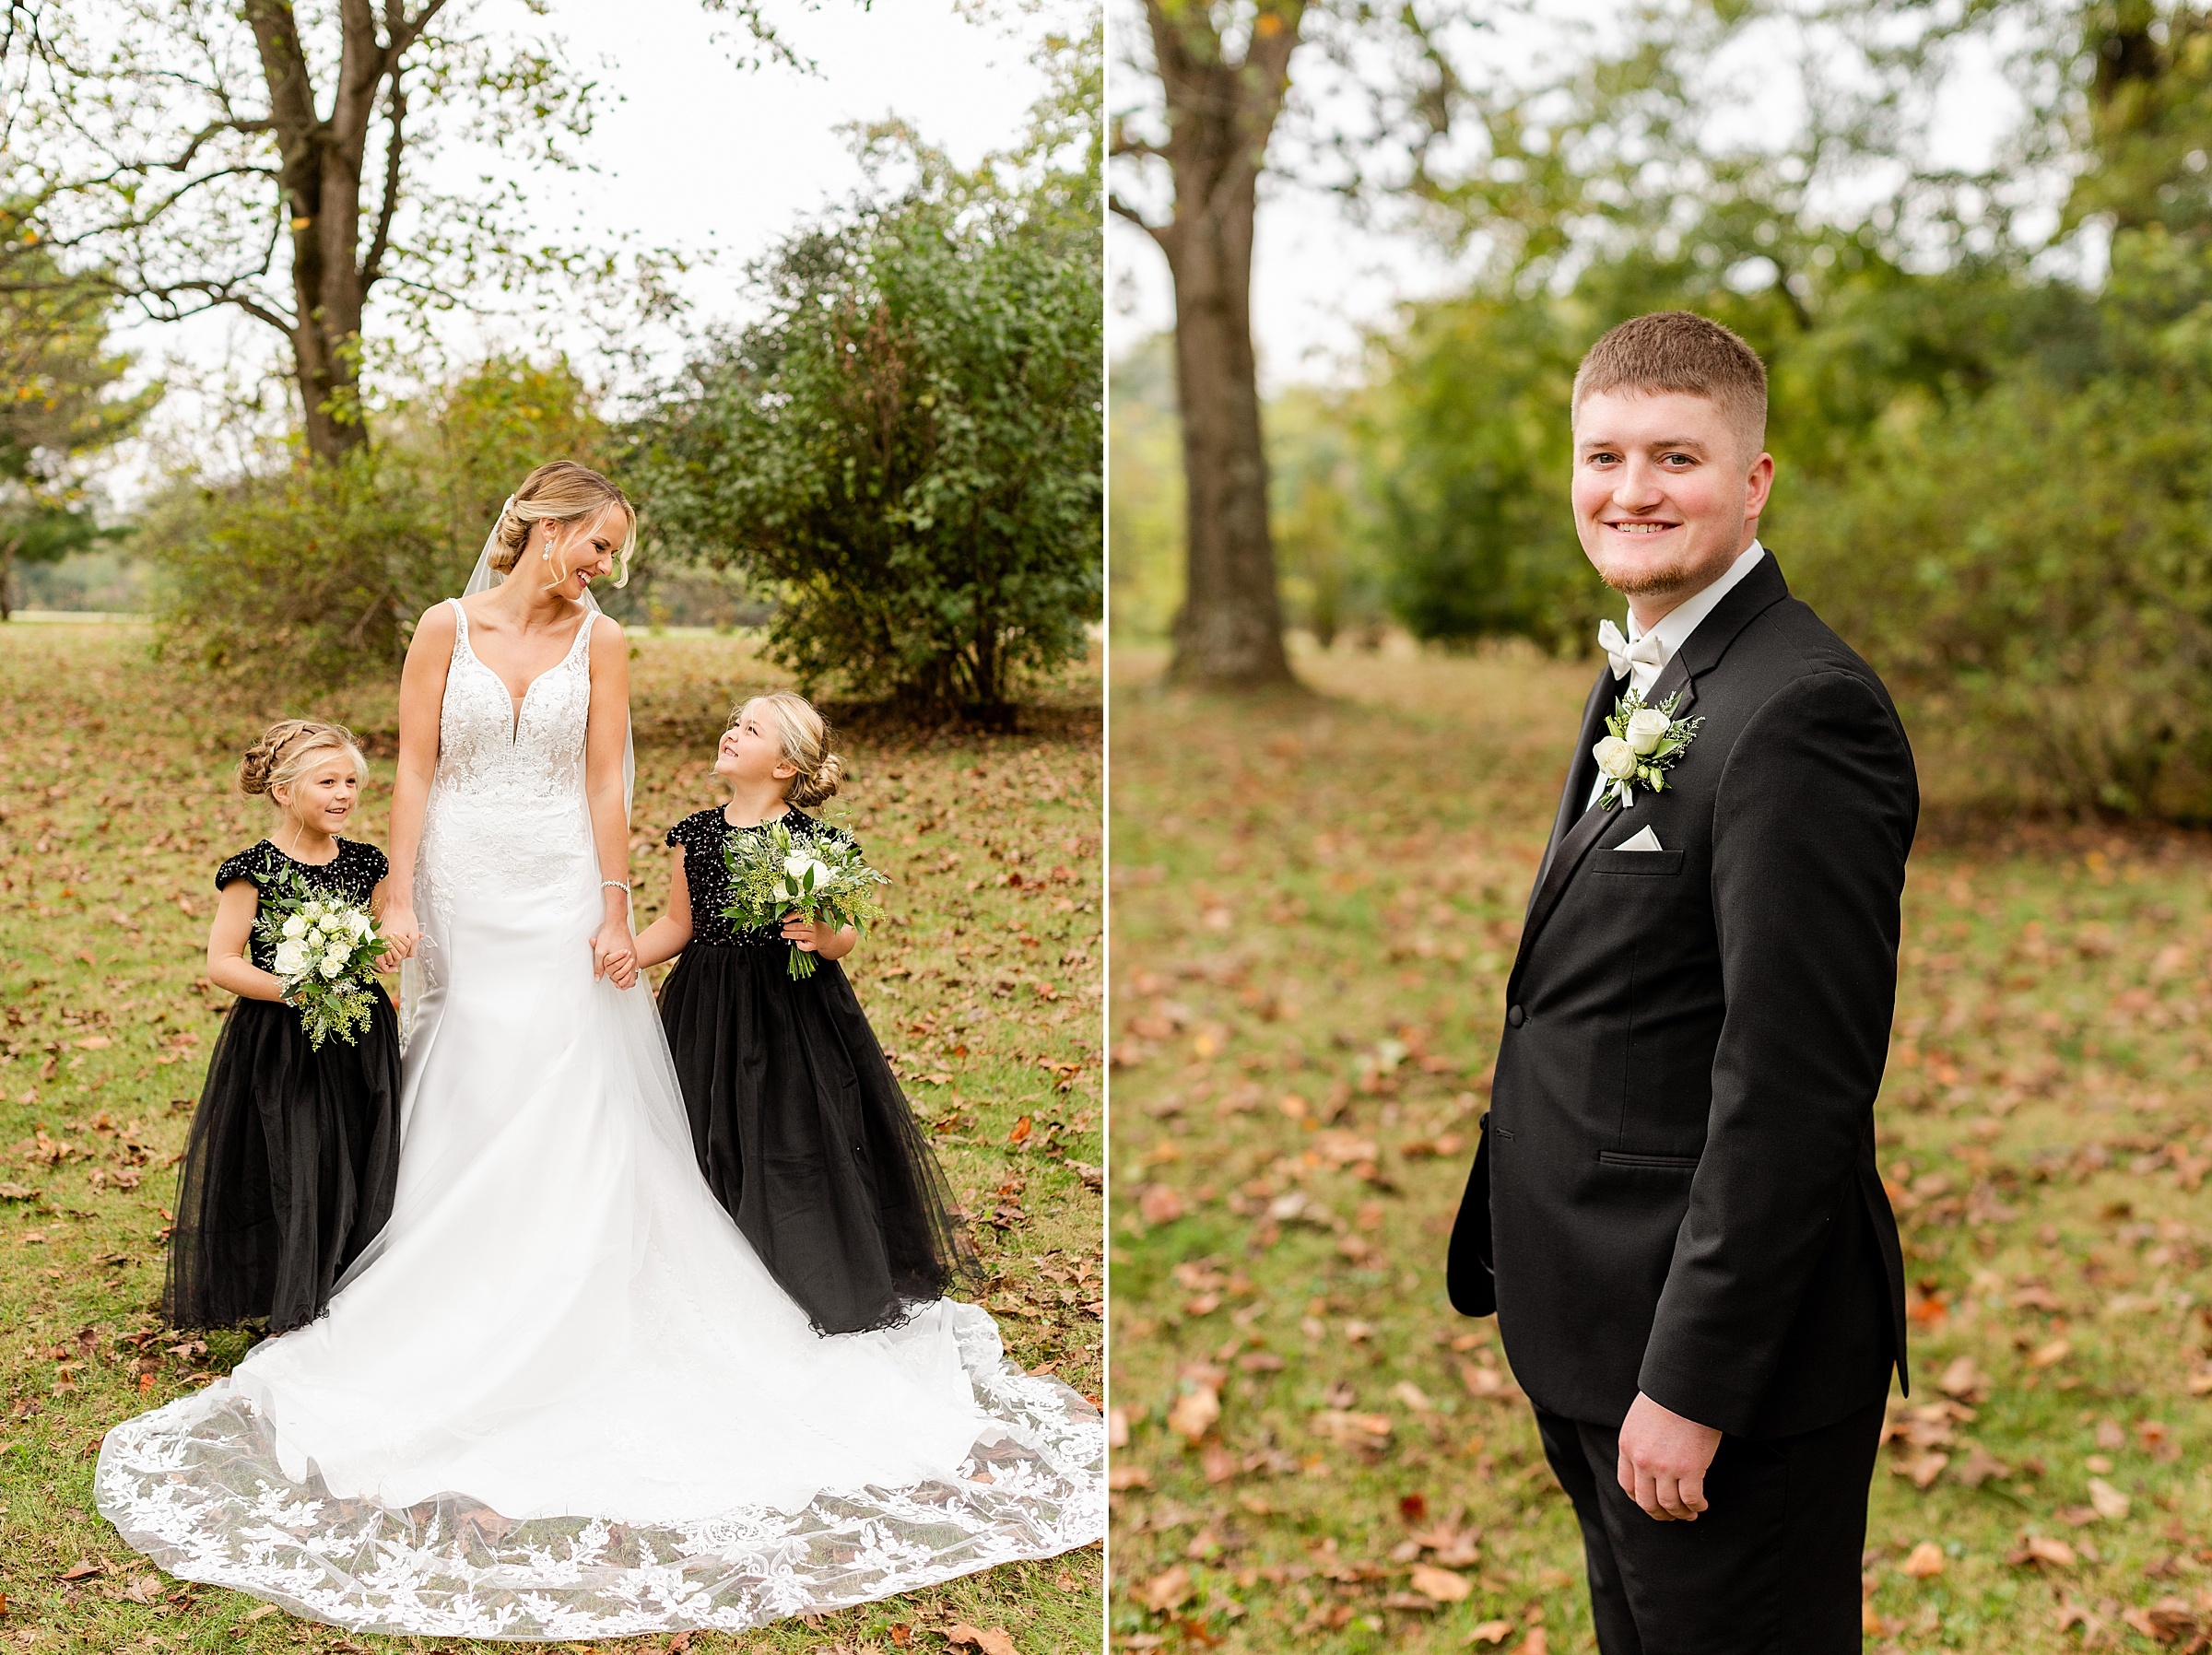 Hannah and Cody's Wedding in Booneville, IN124.jpg